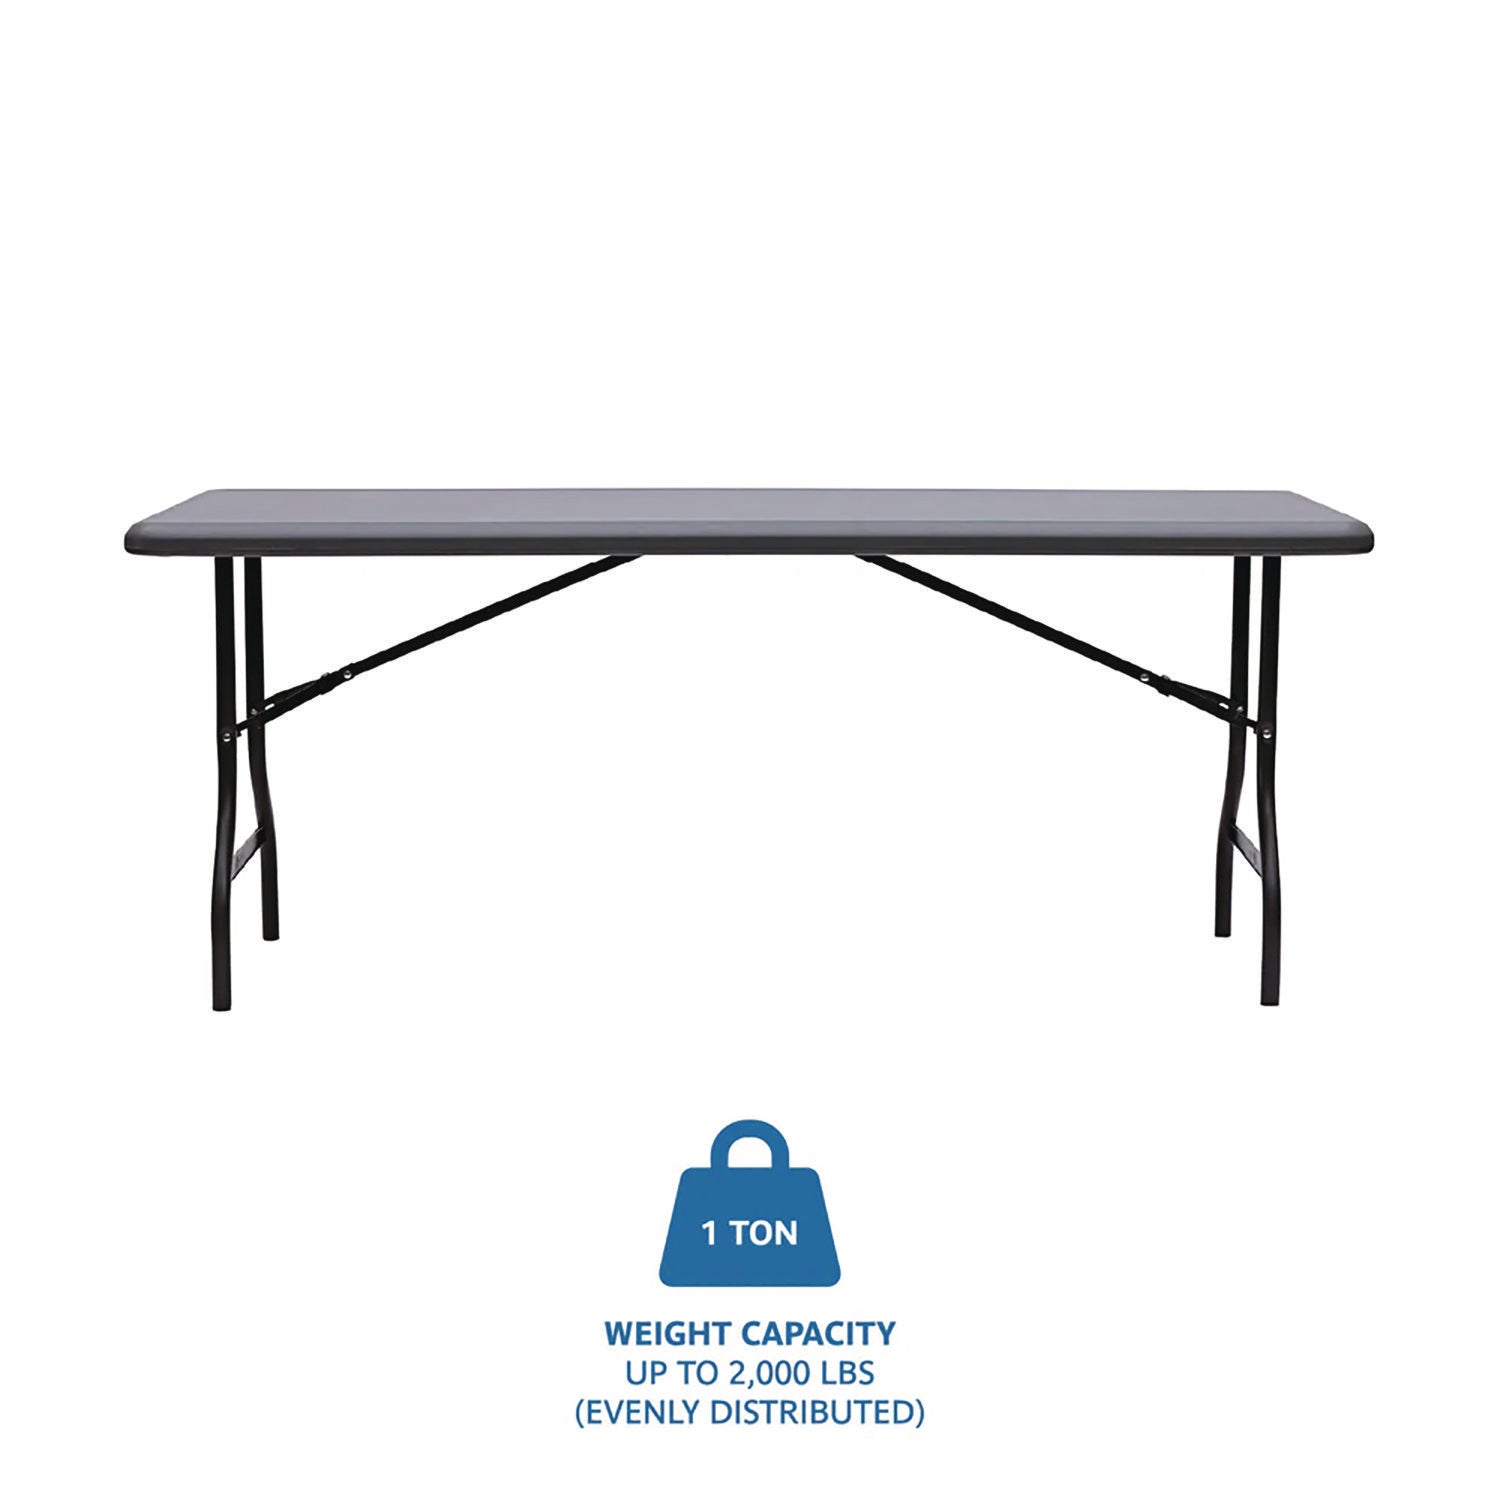 IndestrucTable Industrial Folding Table, Rectangular, 72" x 30" x 29", Charcoal - 2